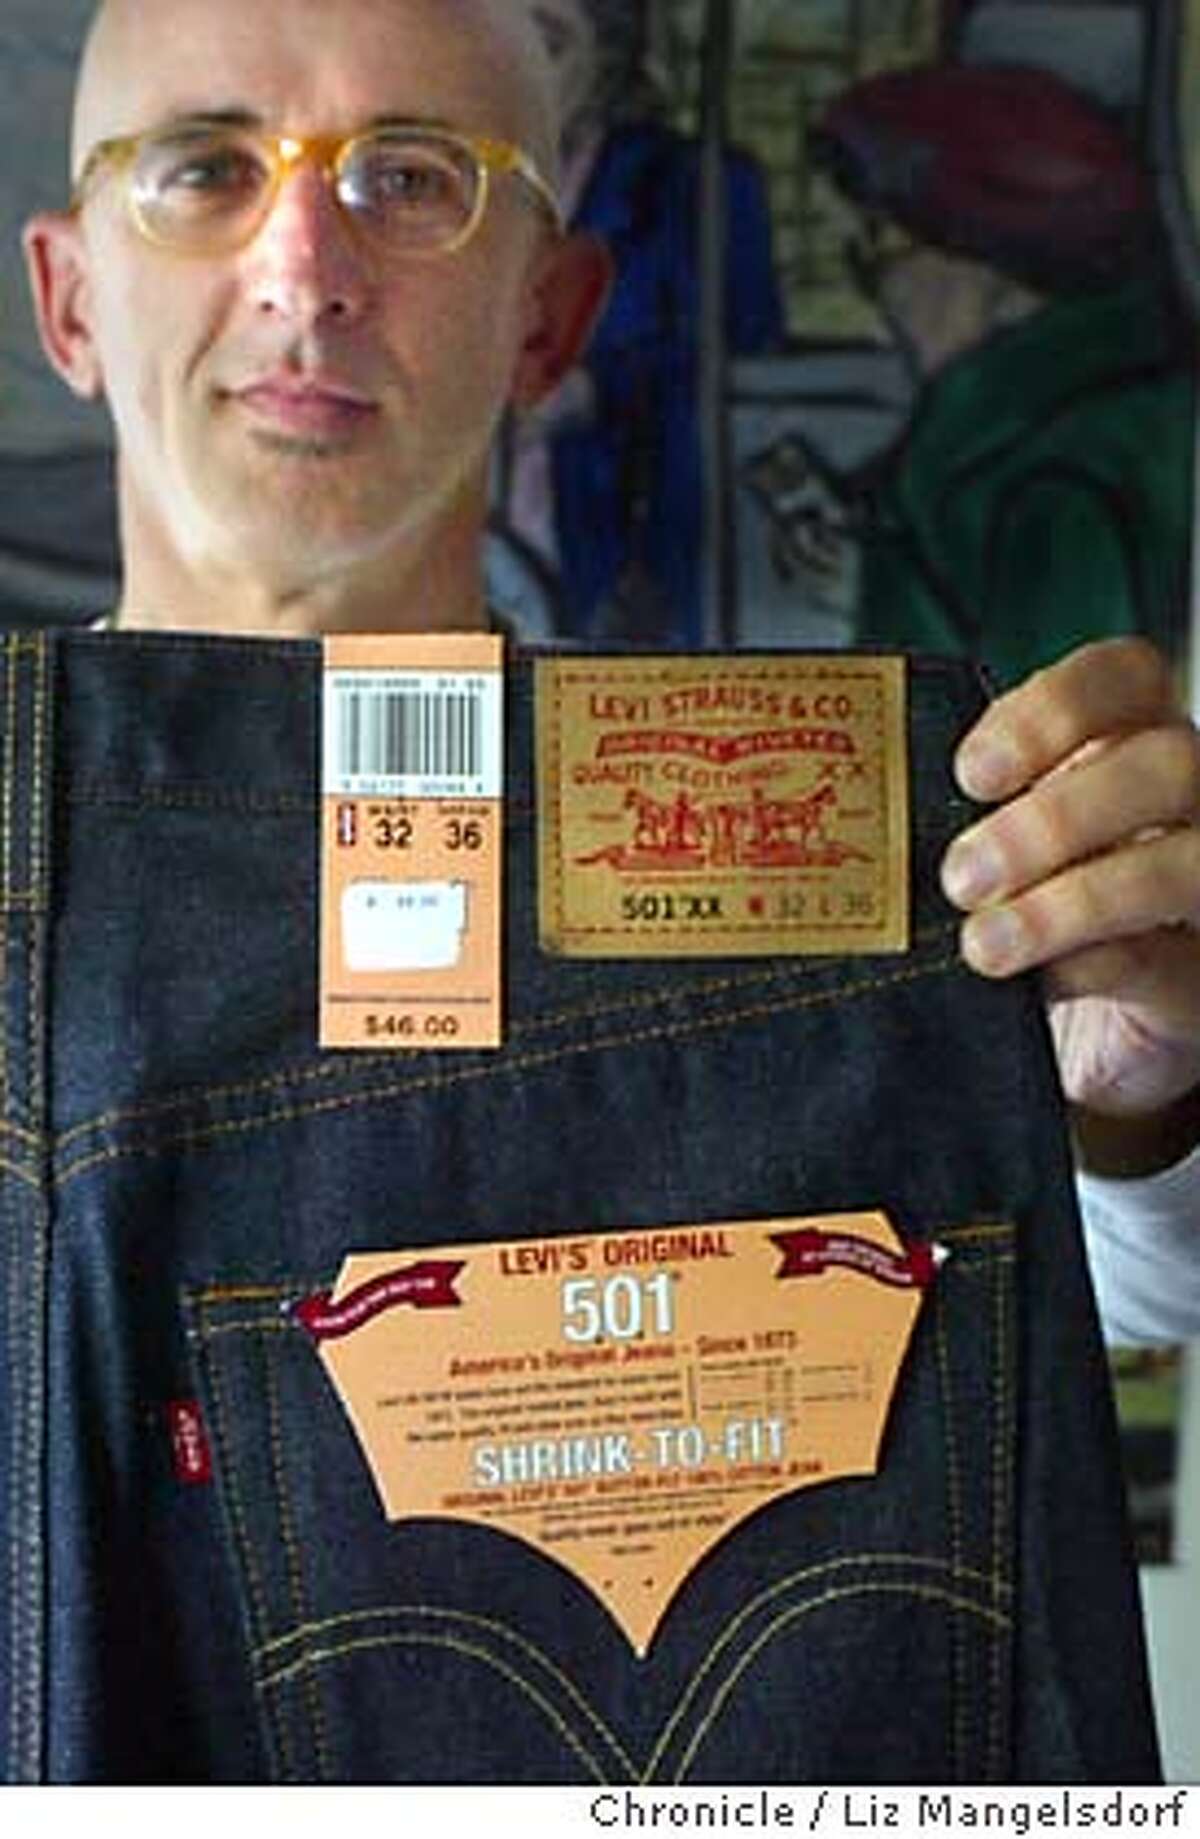 levis30039_LM.jpg Event on 10/29/03 in San Francisco. David Weissman, a longtime Levi's 501 customer, who is upset by the company changing the fit of they 501 jeans, holds up one of the new pair of 501XX jeans. The label on the 501XX jeans, which also have a different pocket stitching. LIZ MANGELSDORF / The Chronicle